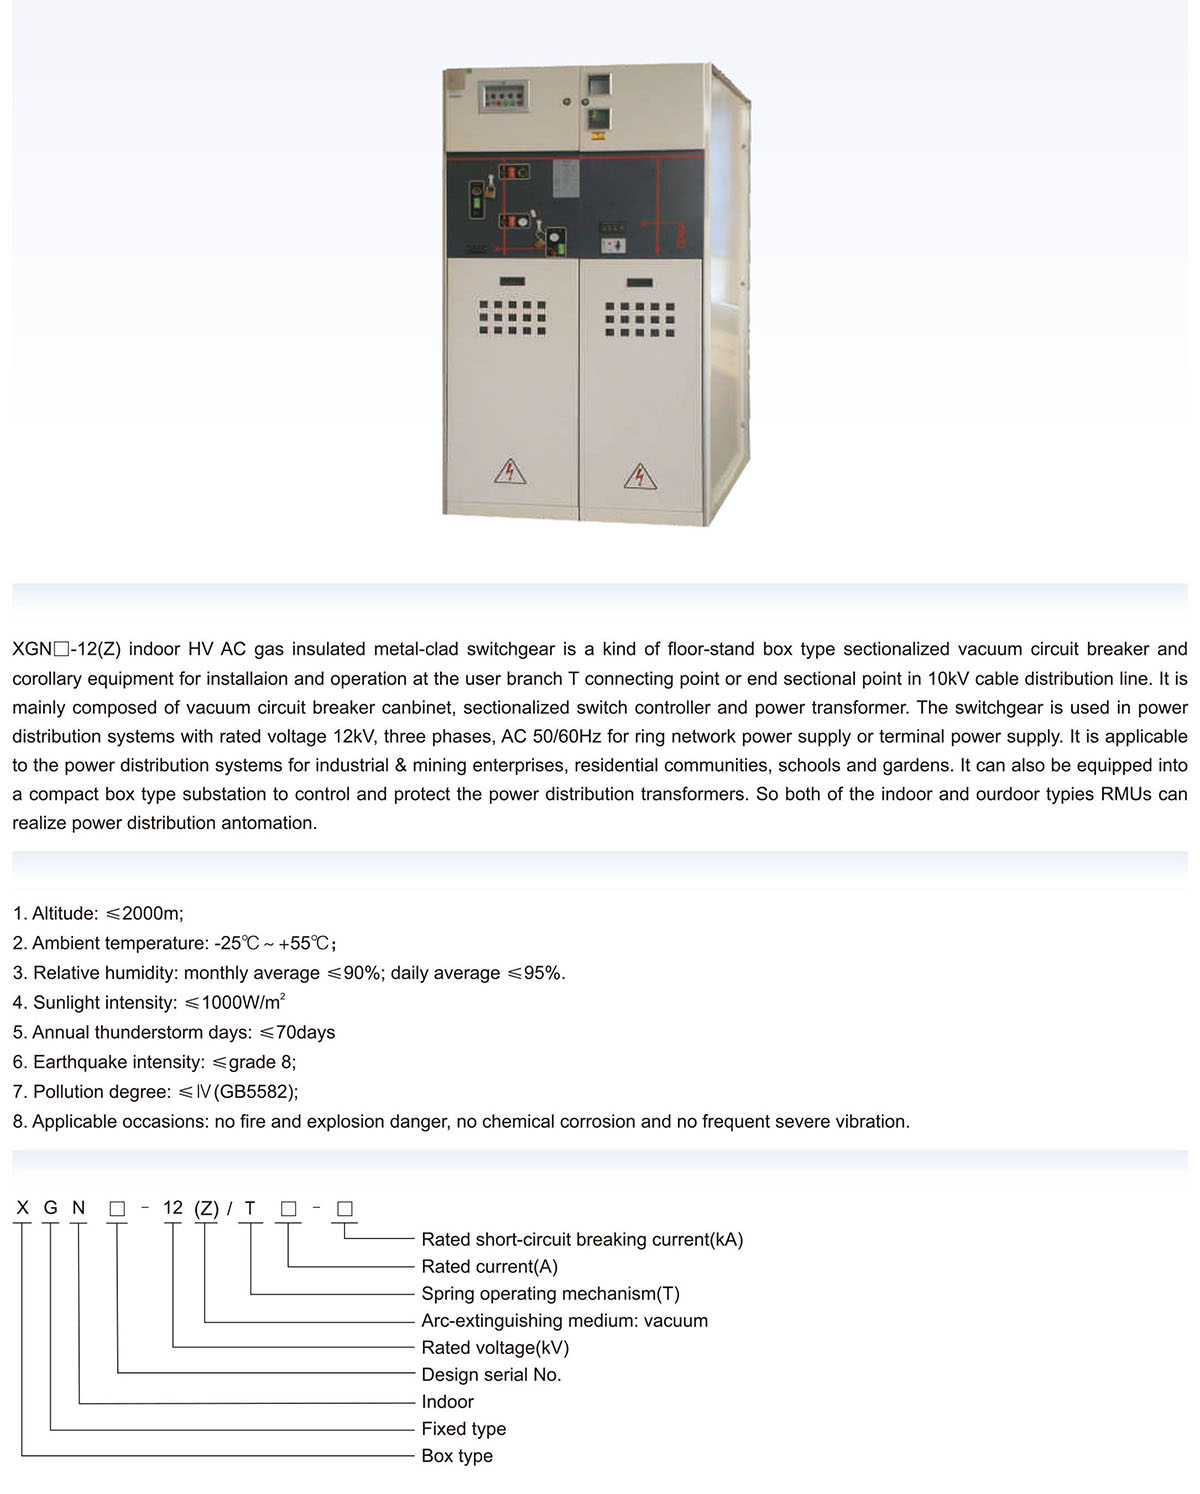 Xgn口 12 Z Type Indoor Hv Ac Gas Insulated Metal Clad Switchgear China Xinerde Technology Co Ltd